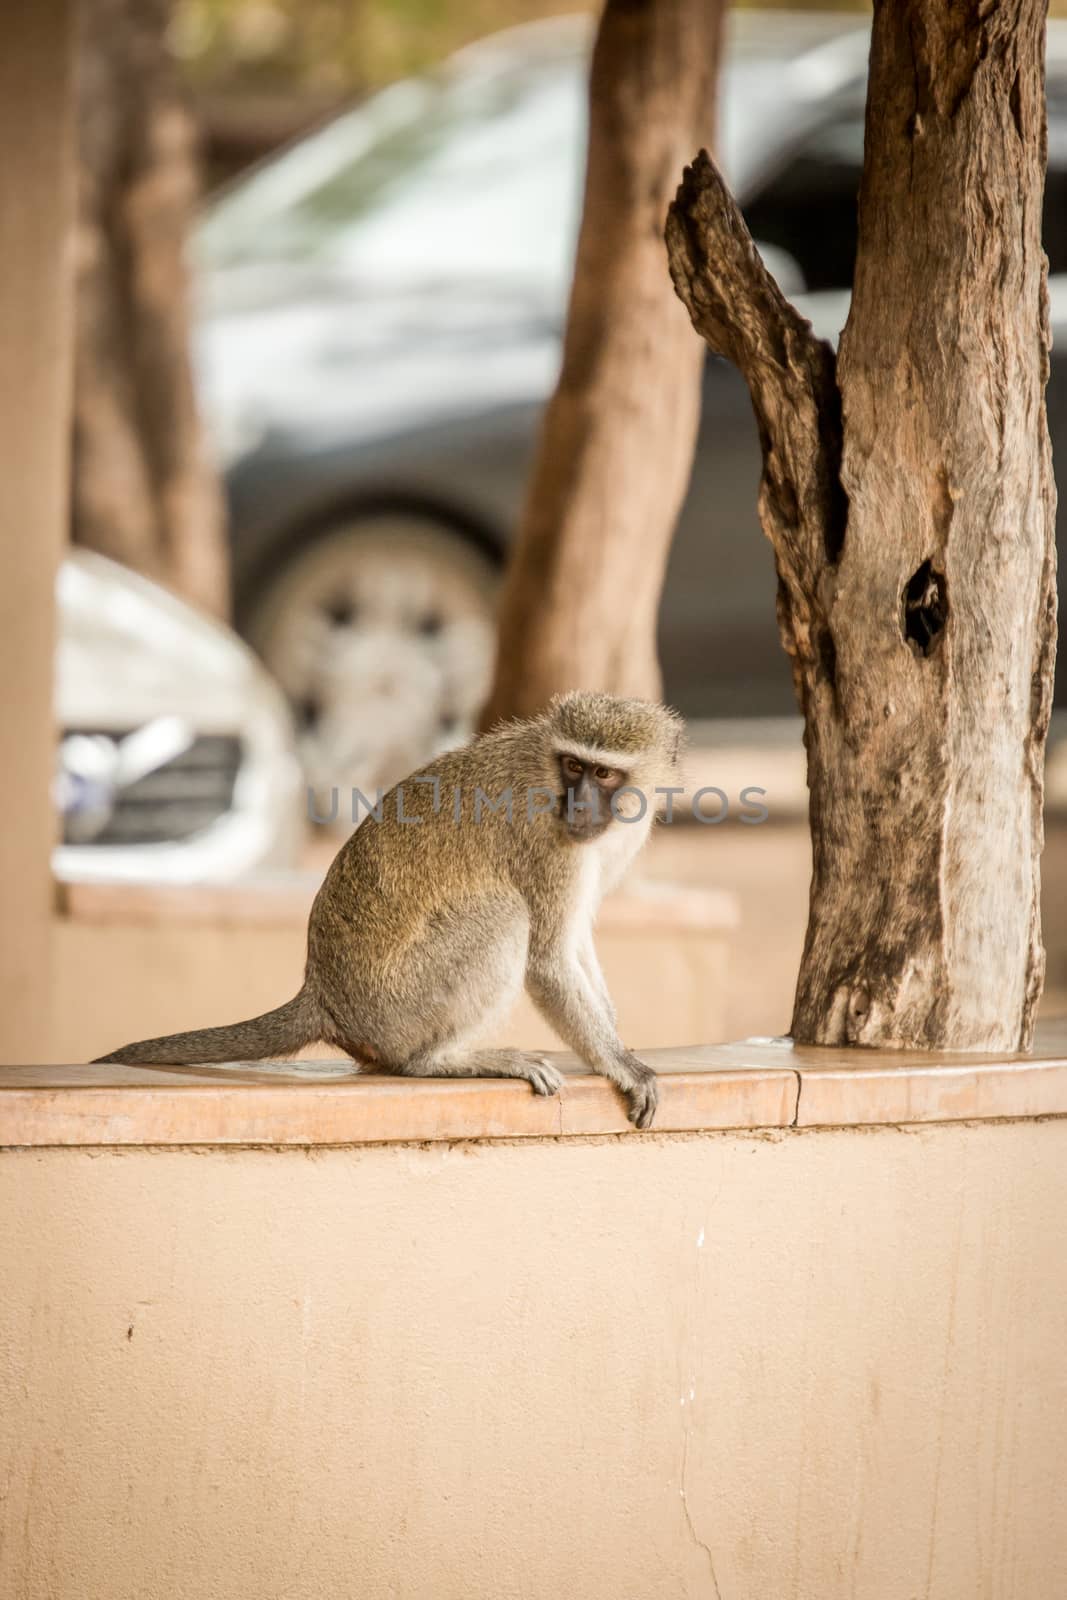 Vervet monkey in the camp in the Kruger National Park, South Africa.